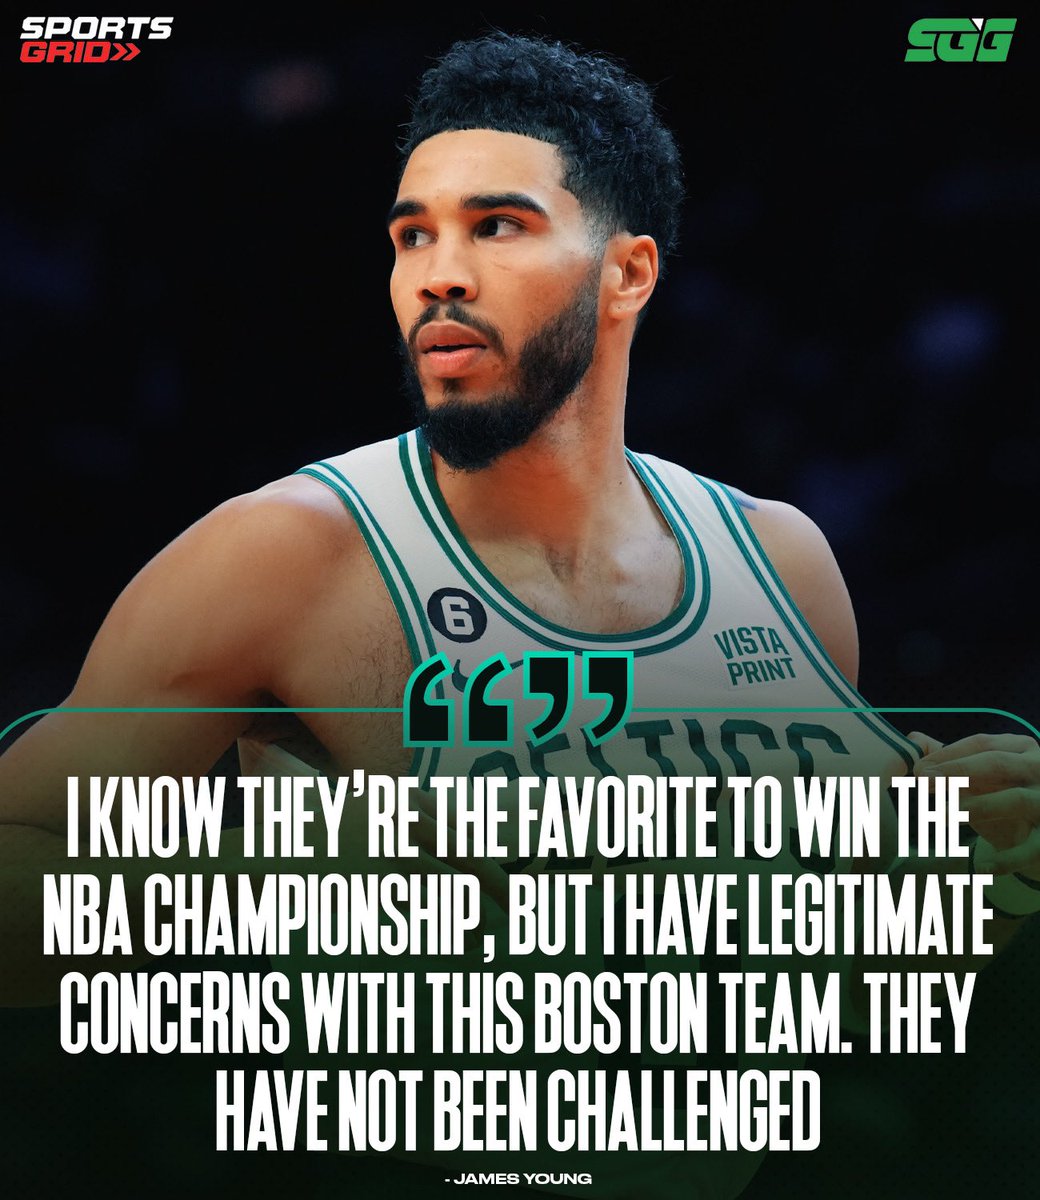 Mavs/Wolves or the Celtics? 🤔 @CoachYoungNJ thinks the winner of the West might have the edge Listen to Betting Above the Rim Podcast here ⬇️ Spotify: spoti.fi/46CQOXI Apple Podcasts: apple.co/4a1HMqg YouTube: youtu.be/SidP5-_hko4